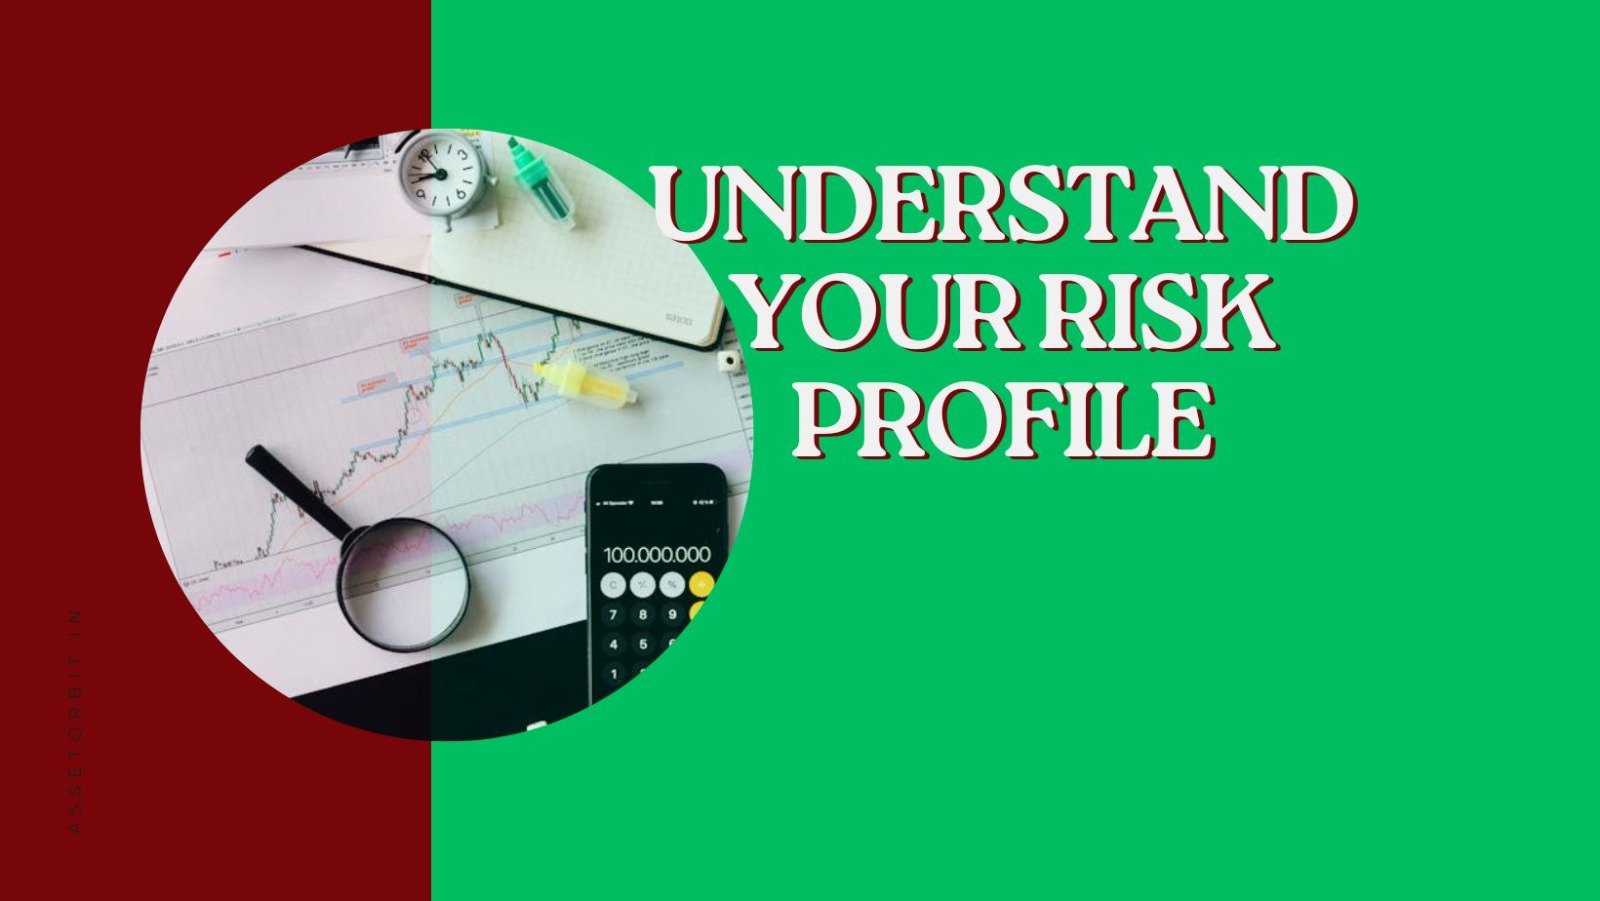 How Can You Understand Your Risk Profile?